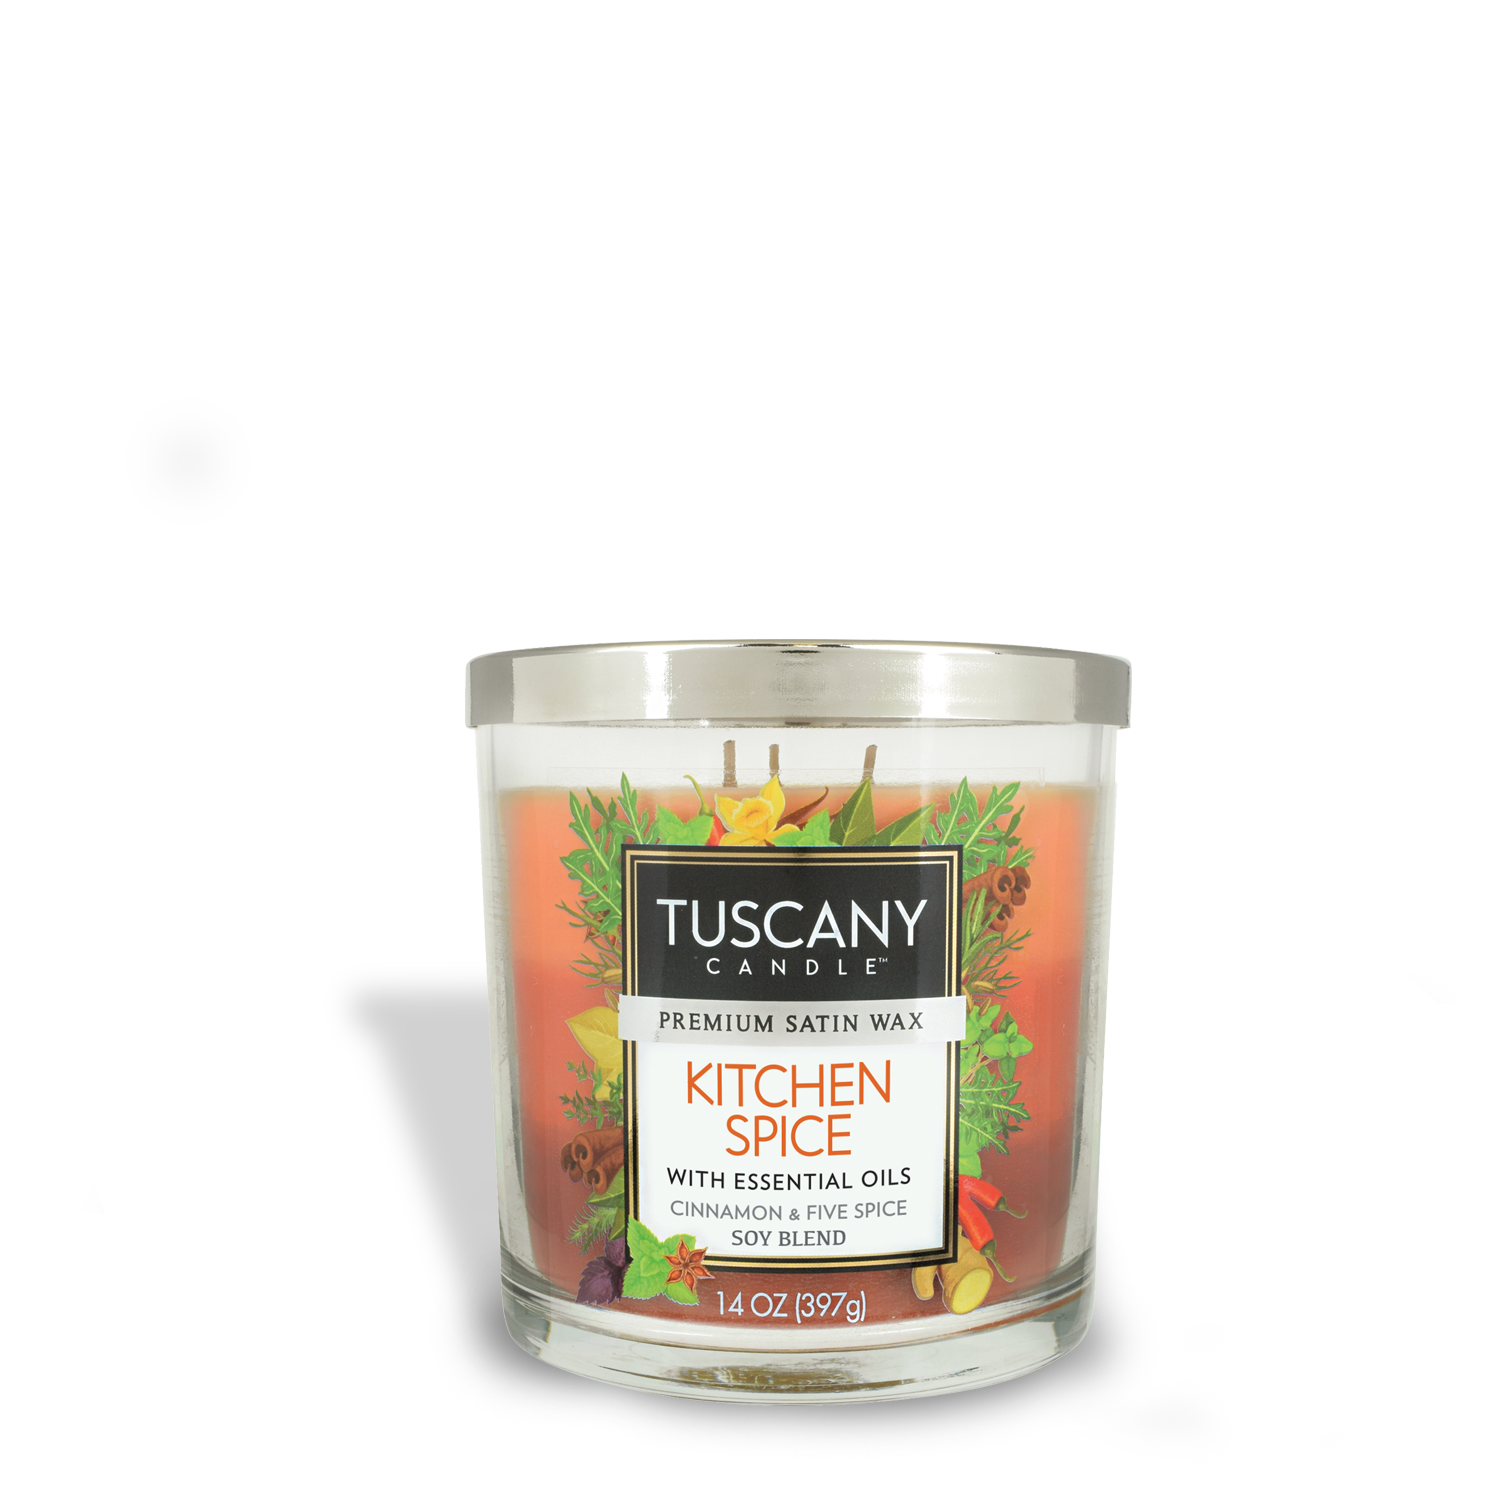 Embark on an aromatic adventure with our Kitchen Spice Long-Lasting Scented Jar Candle (14 oz) by Tuscany Candle.